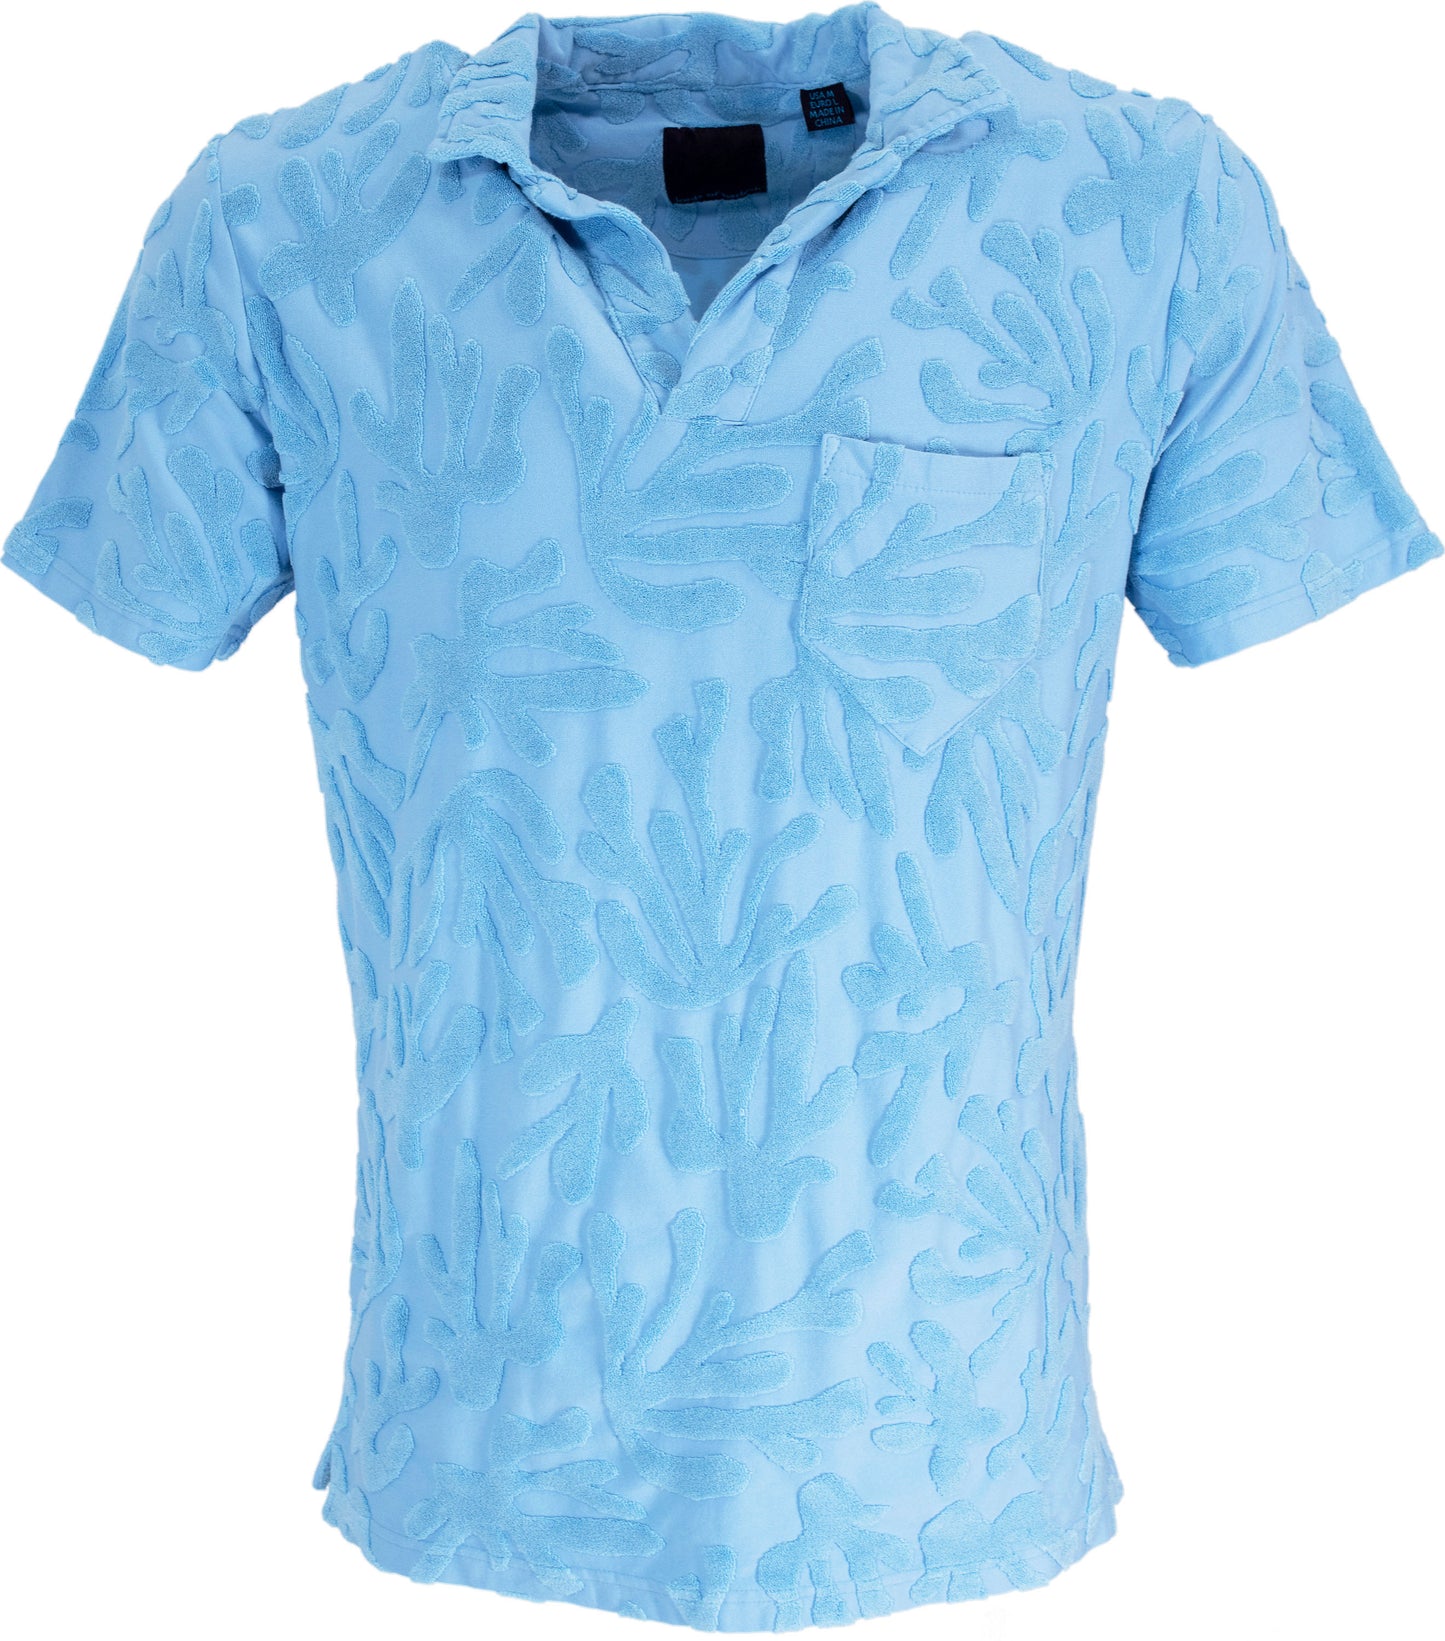 JOHNNY CORAL TOWEL POLO SHIRT IN SKY